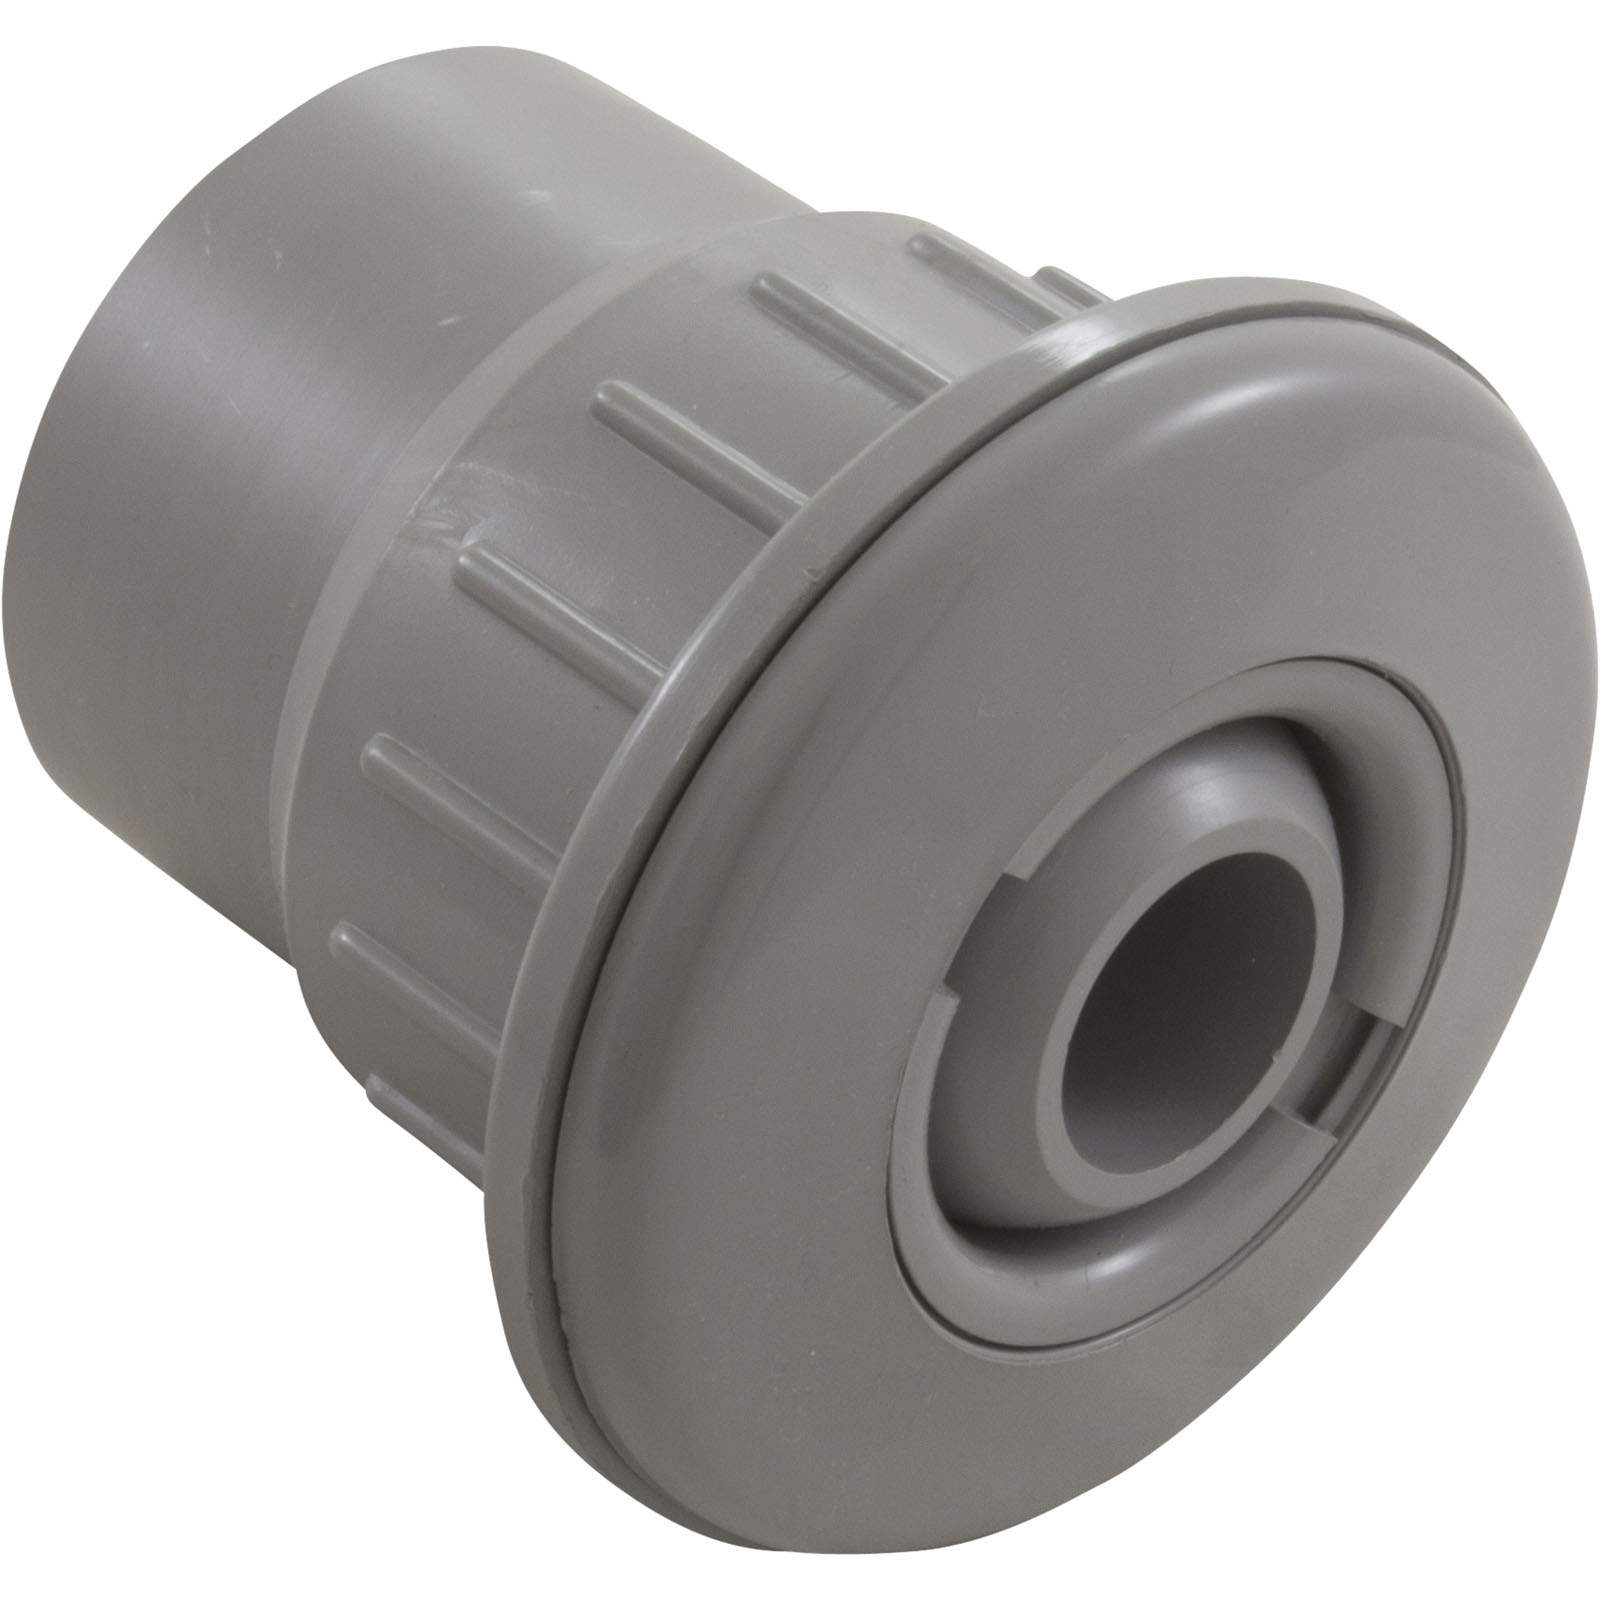 Picture of 25523-701-000 Fiberglass Wall Fitting With Eyeball Gray